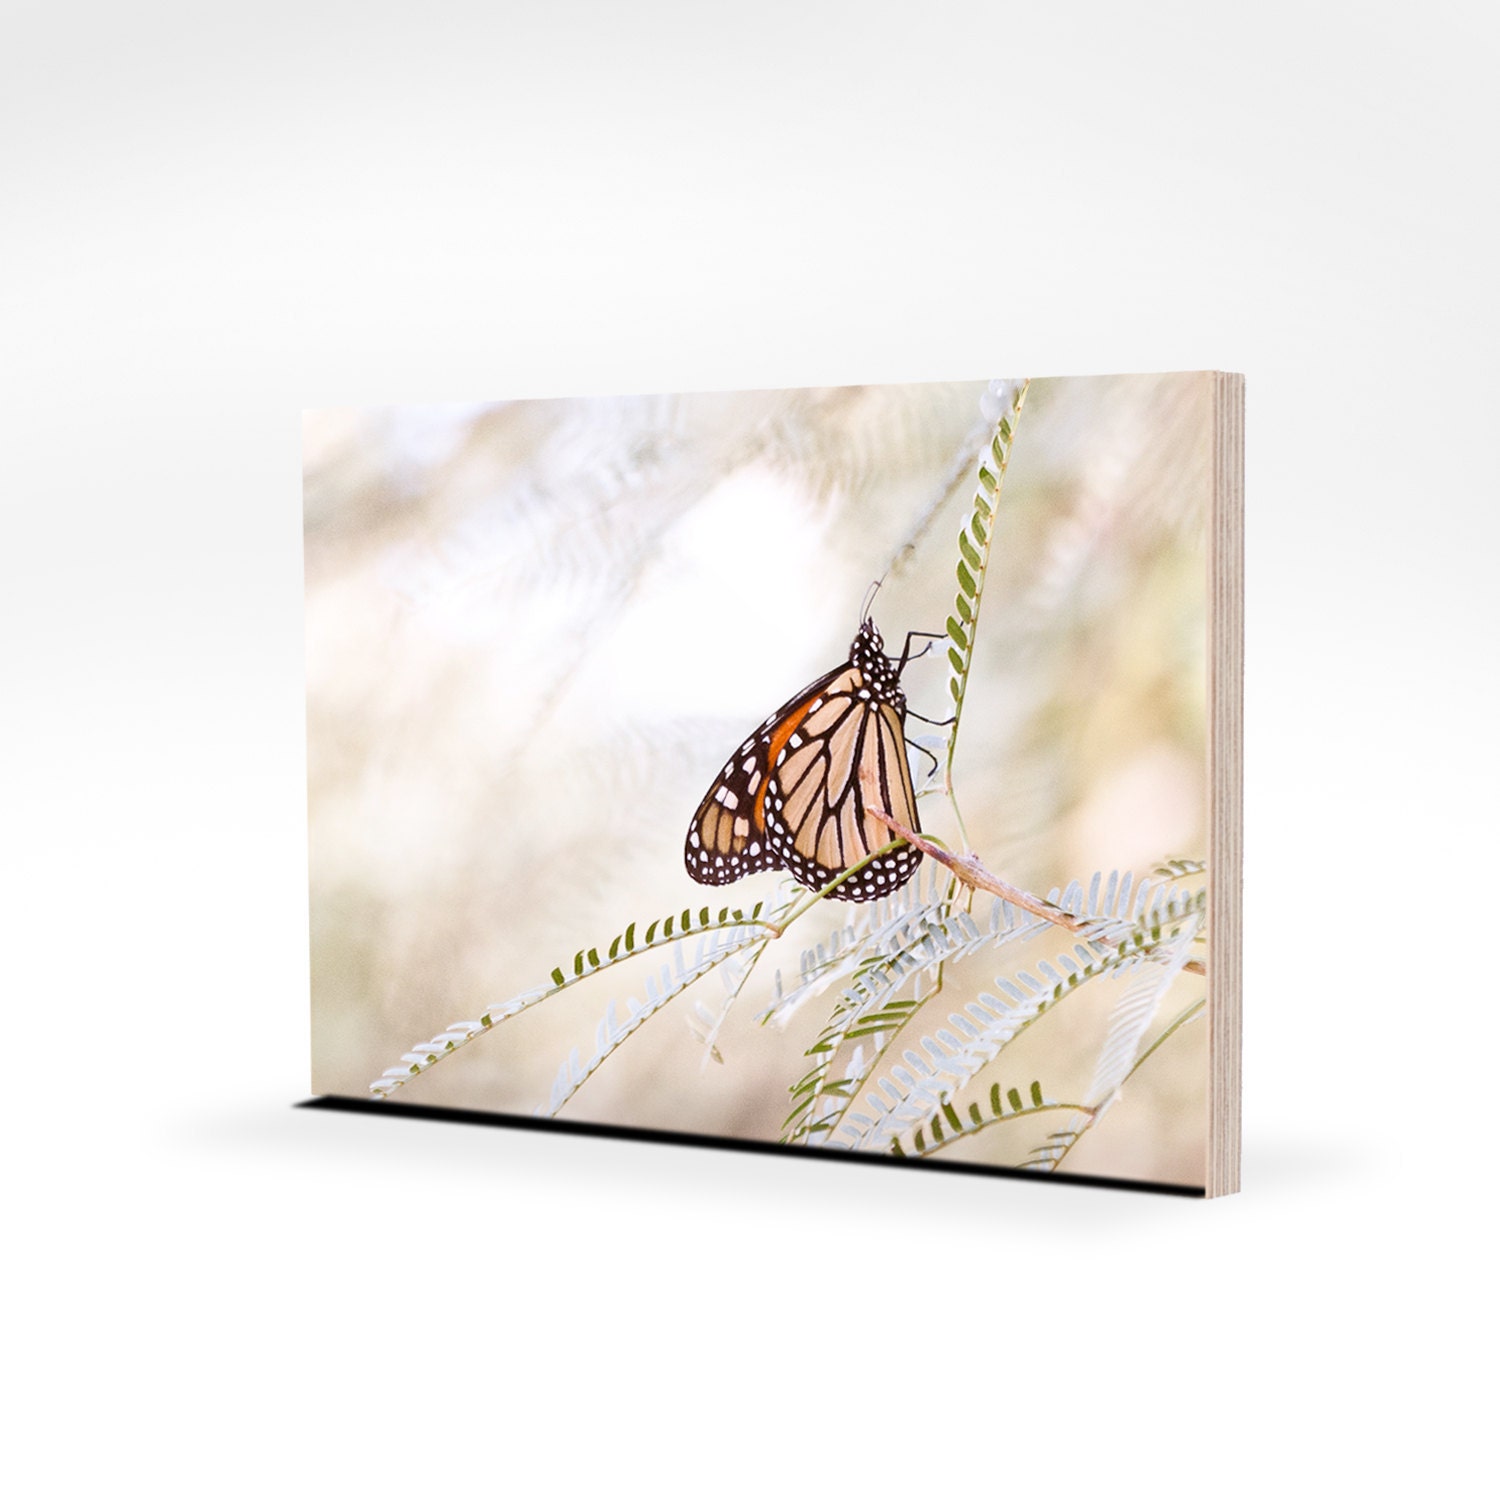 wall art ready-to-hang 5x7 butterfly woodland photo panel eco friendly maple plywerk FREE SHIPPING, no framing required